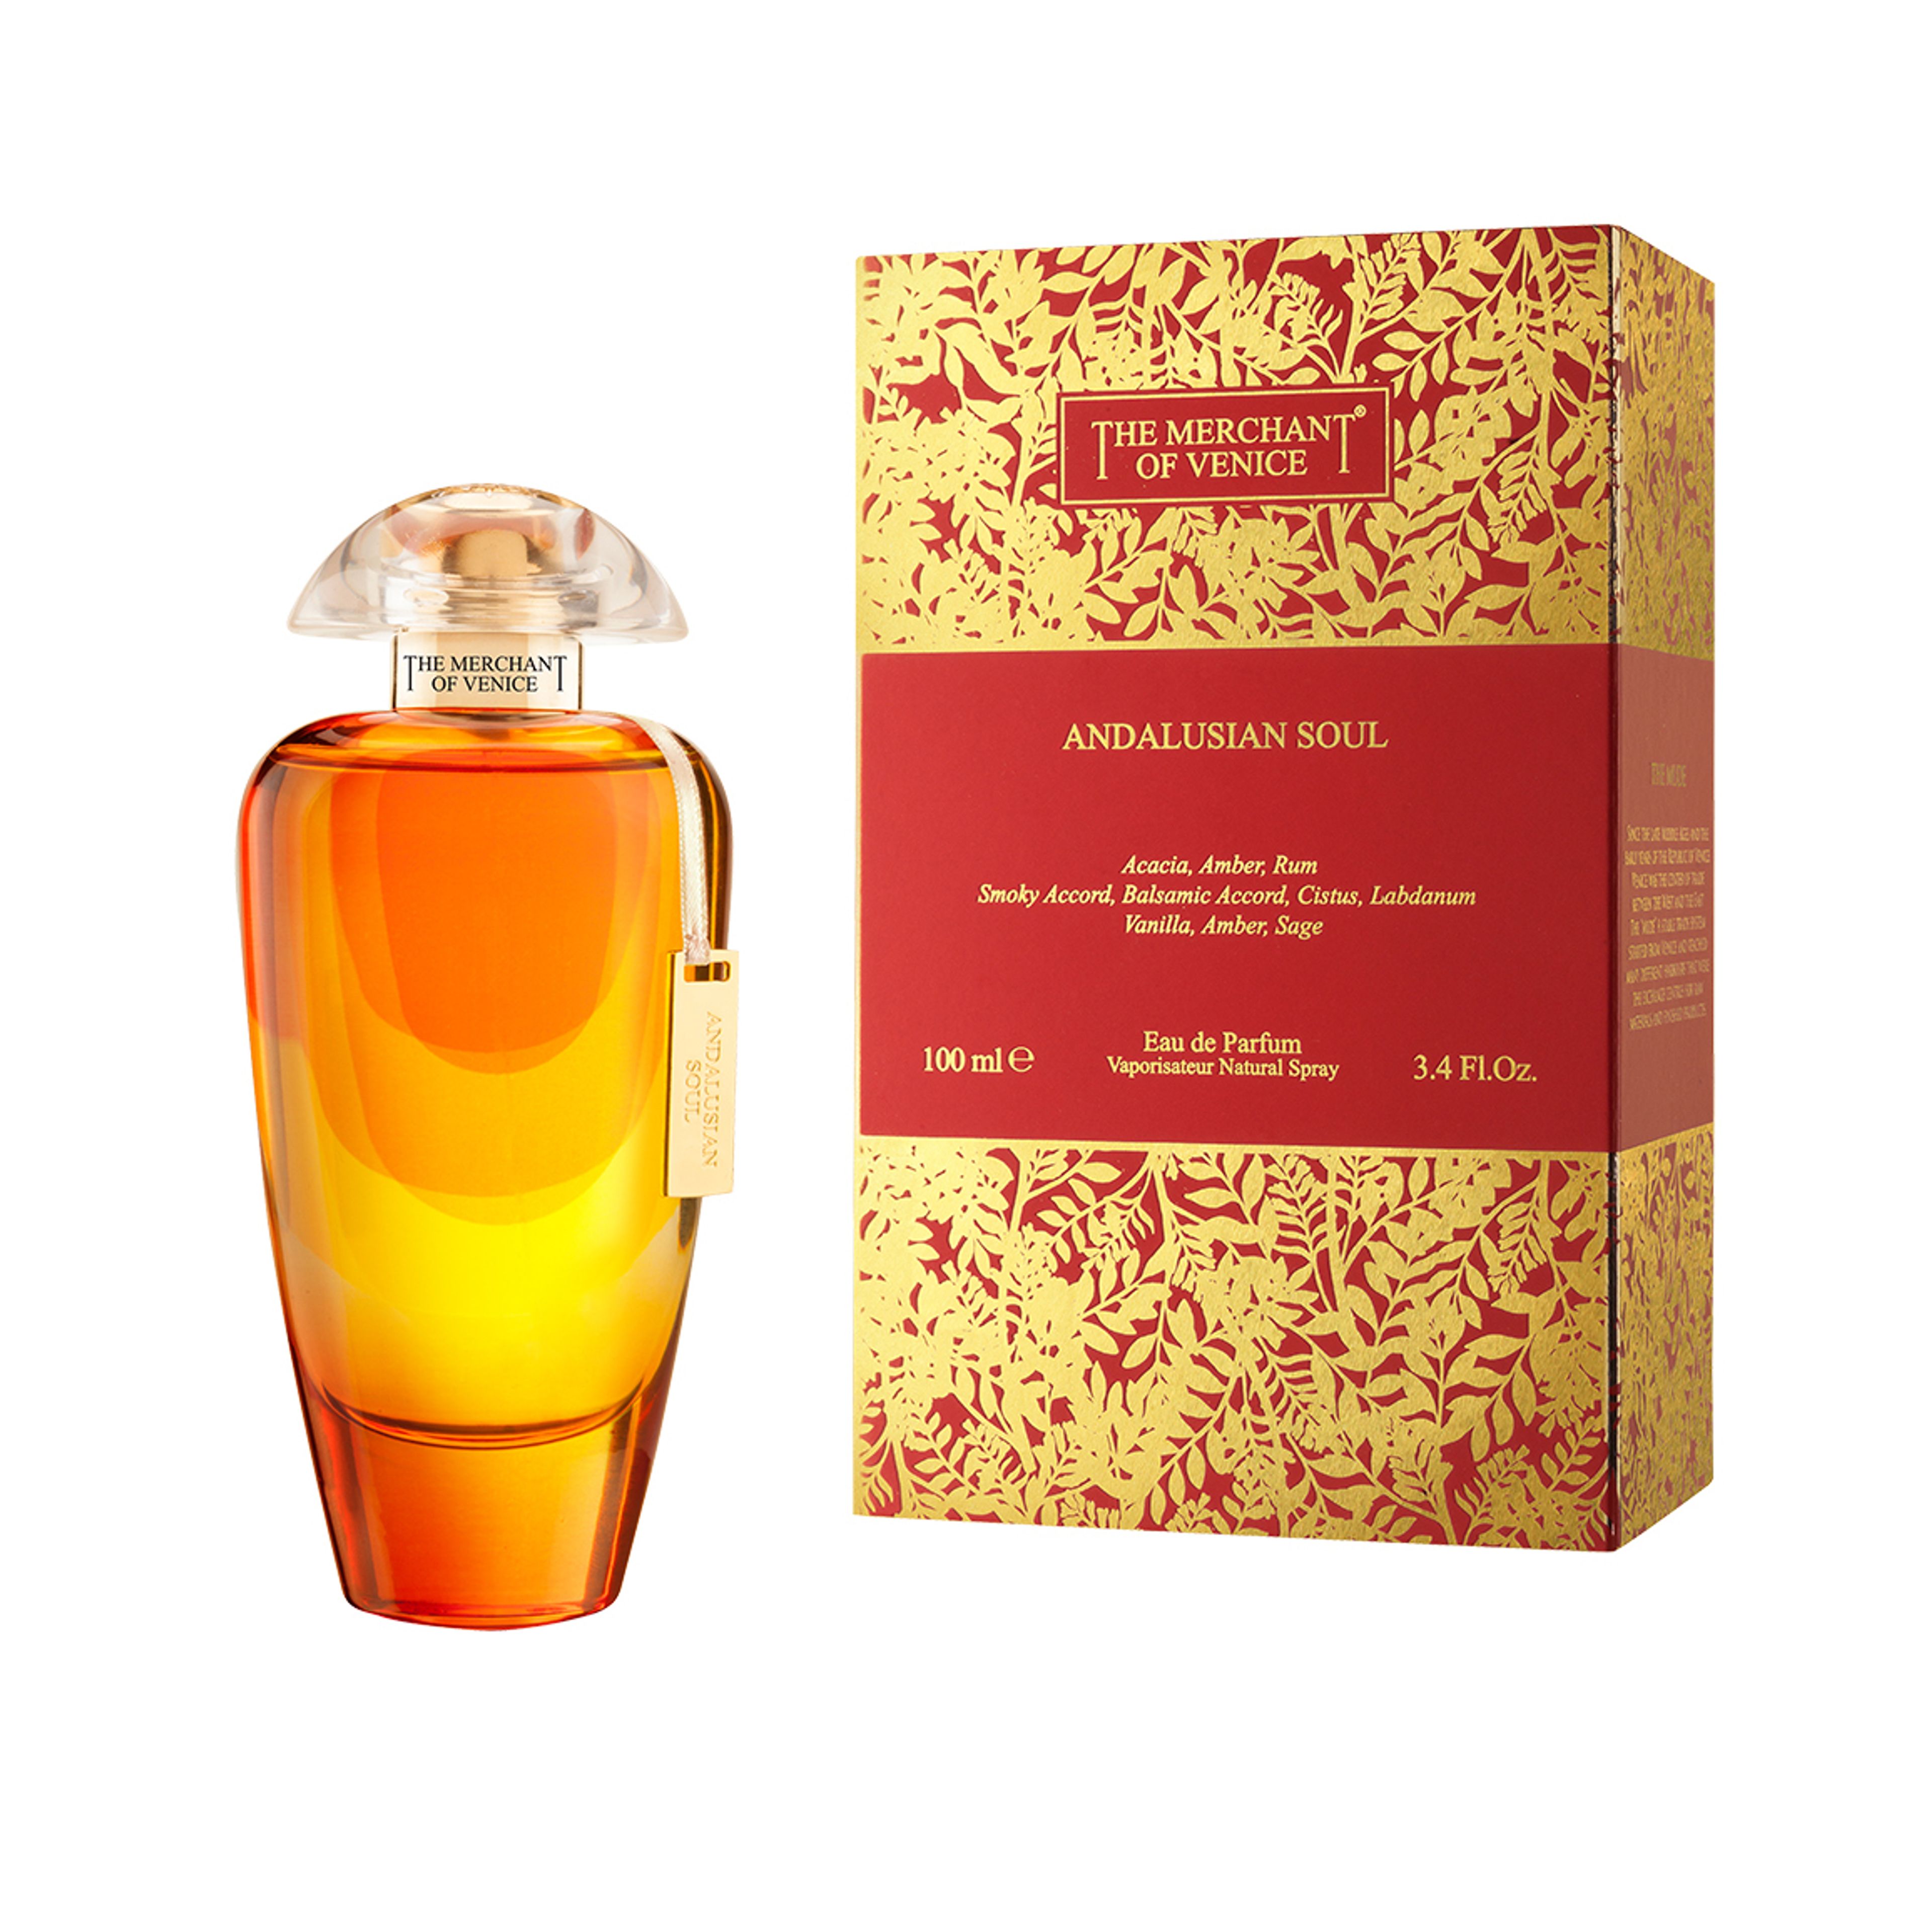 Andalusian Soul Edp The Merchant of Venice 2